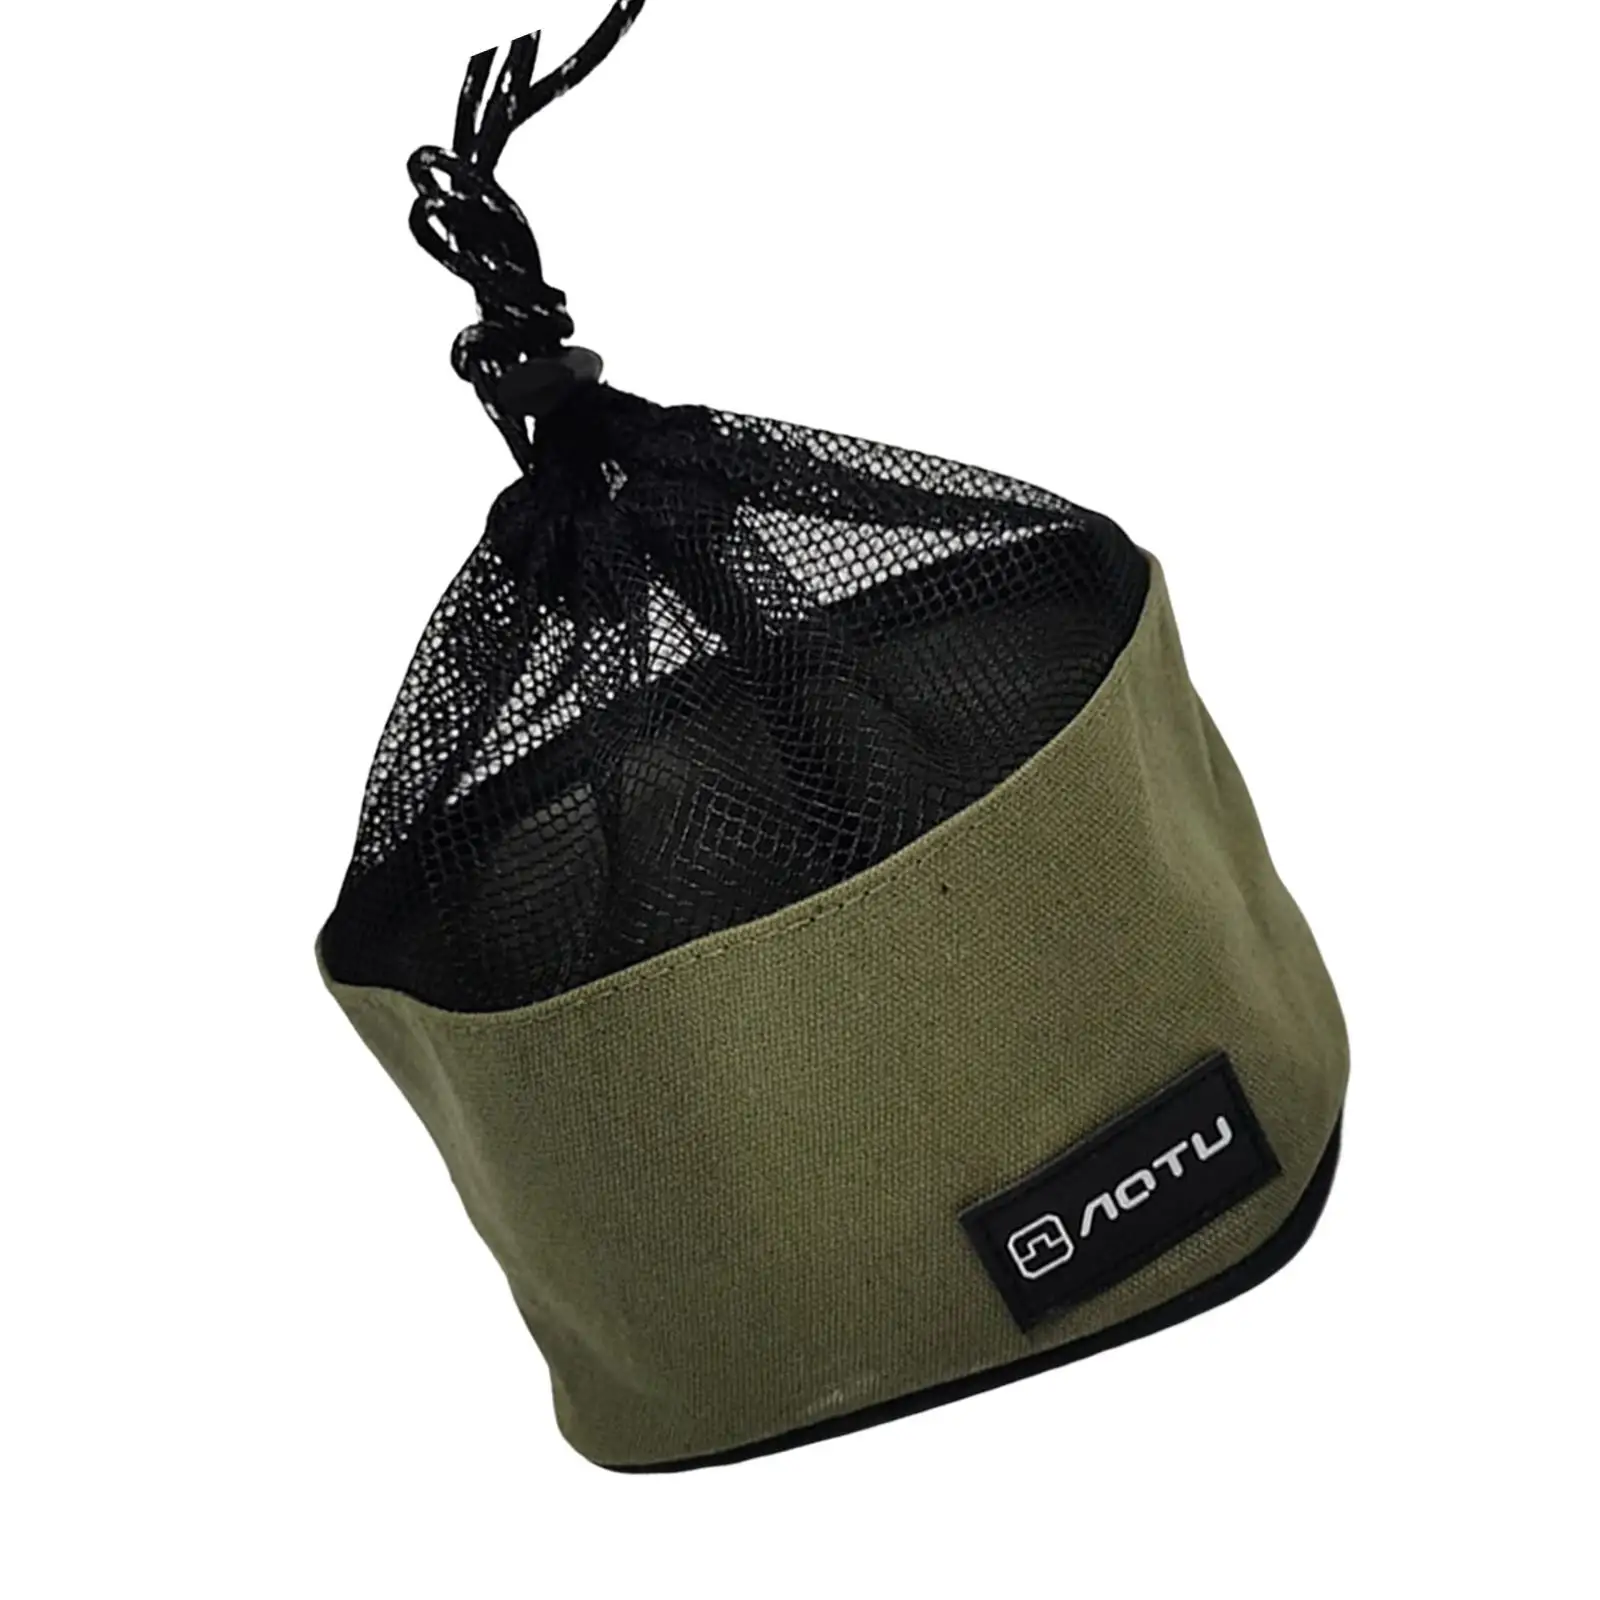 Camping Cookware Storage Bag Case Tote Drawstring Bag Carrier Picnic Outdoor